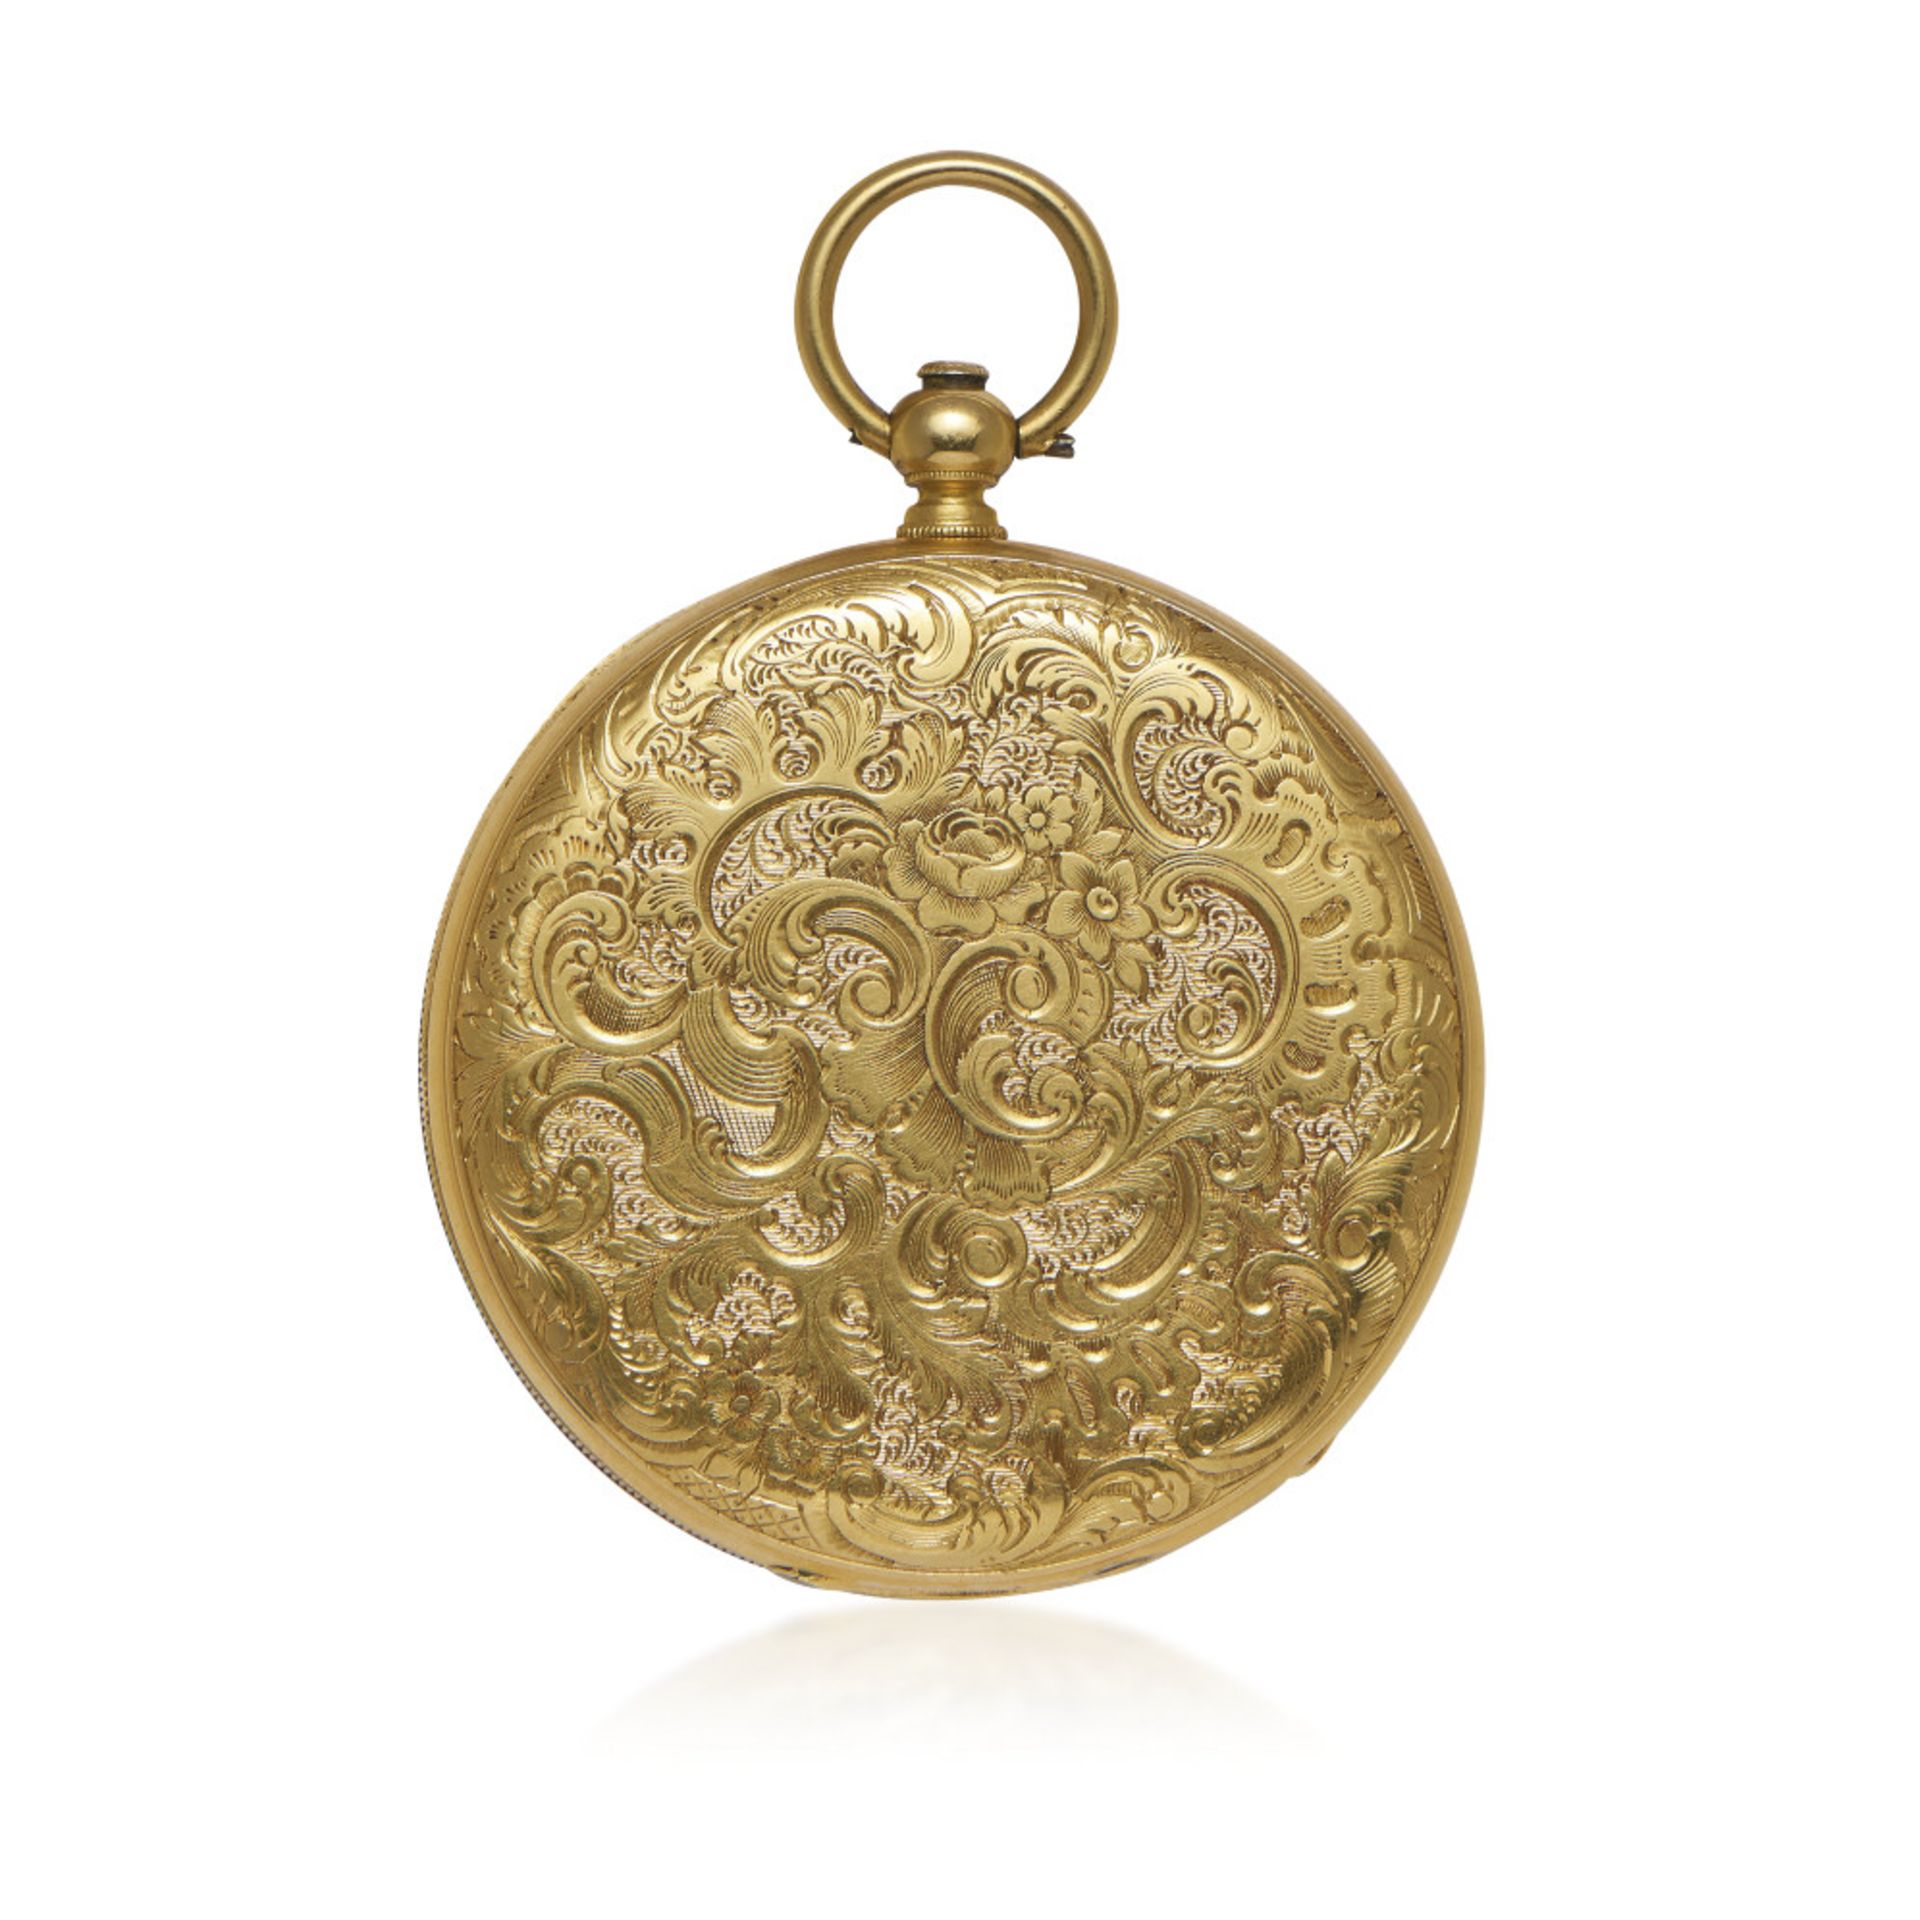 PENDATIF IN GOLD, CIRCA 1830 - PENDATIF IN GOLD, CIRCA 1830 Case: n. 18983, four-body in gold,